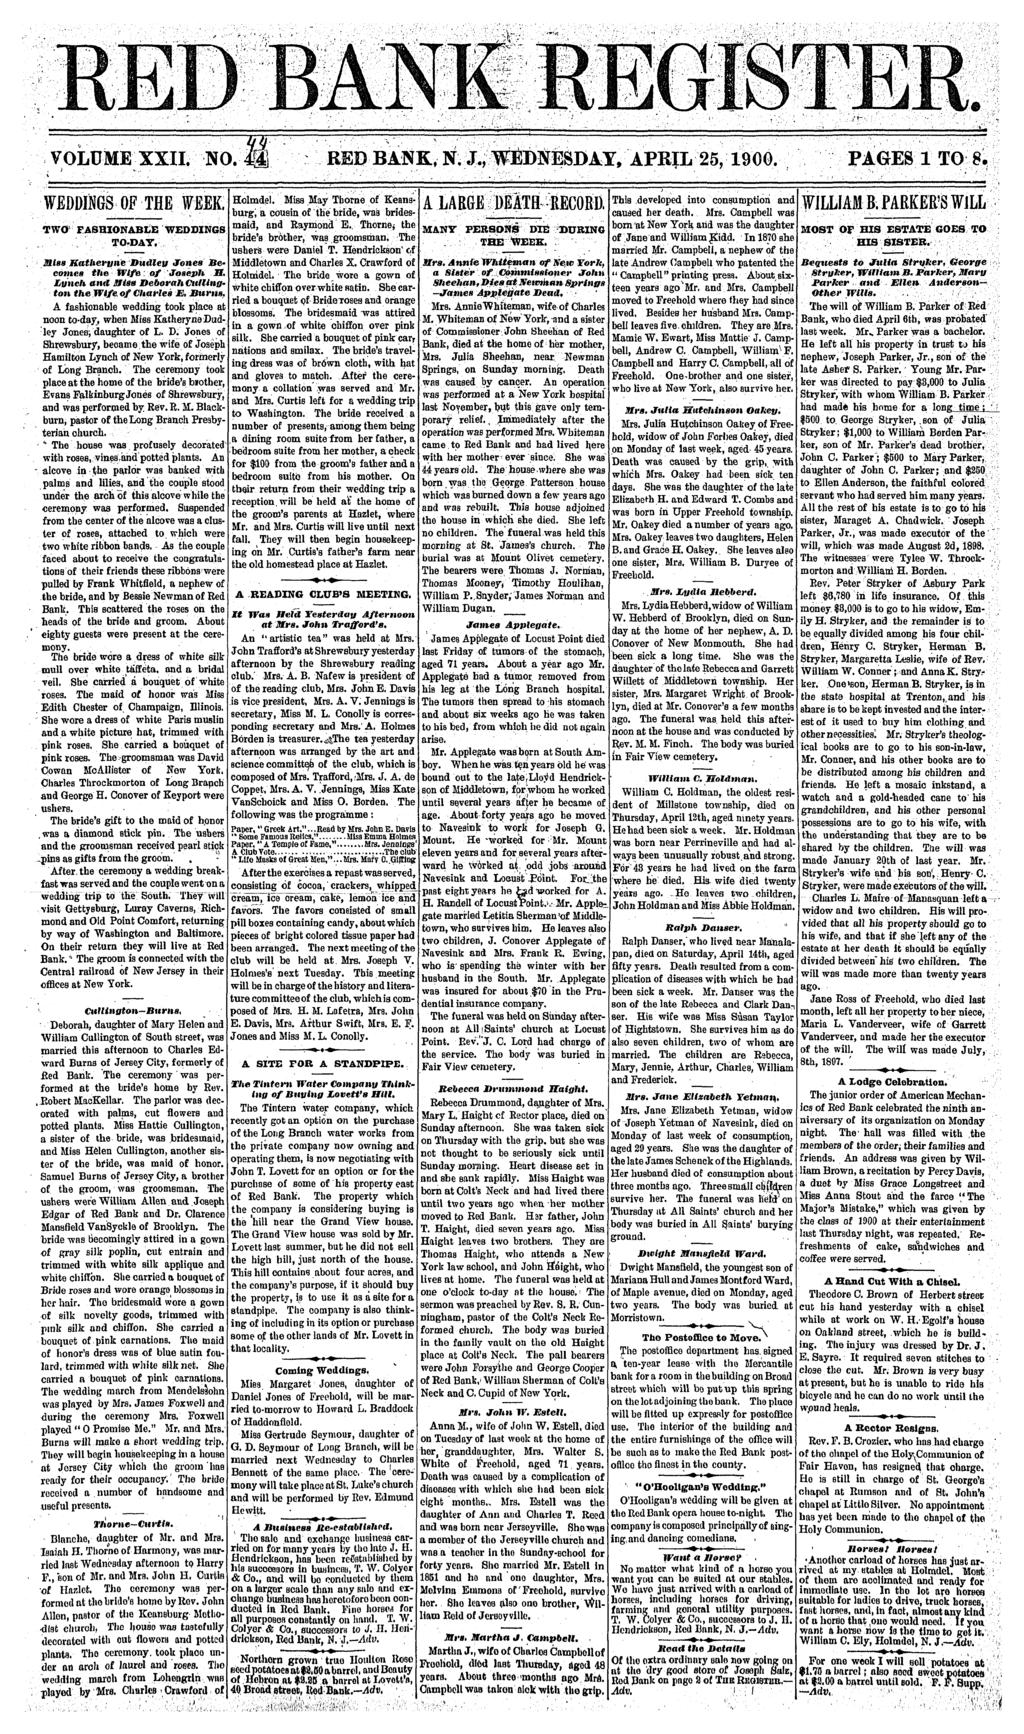 VOLUME XX. 'NO. M RED BANK, N, J., WEDNESDAY, APRL 25, 1900. PAGES 1 TO 8. WEDDNGS OF THE WEEK. TWO FASHONABLE WEDDNGS TO-DAY. Slss Kahervne Dudley Jones Becomes he Wfe: of Joseph B.